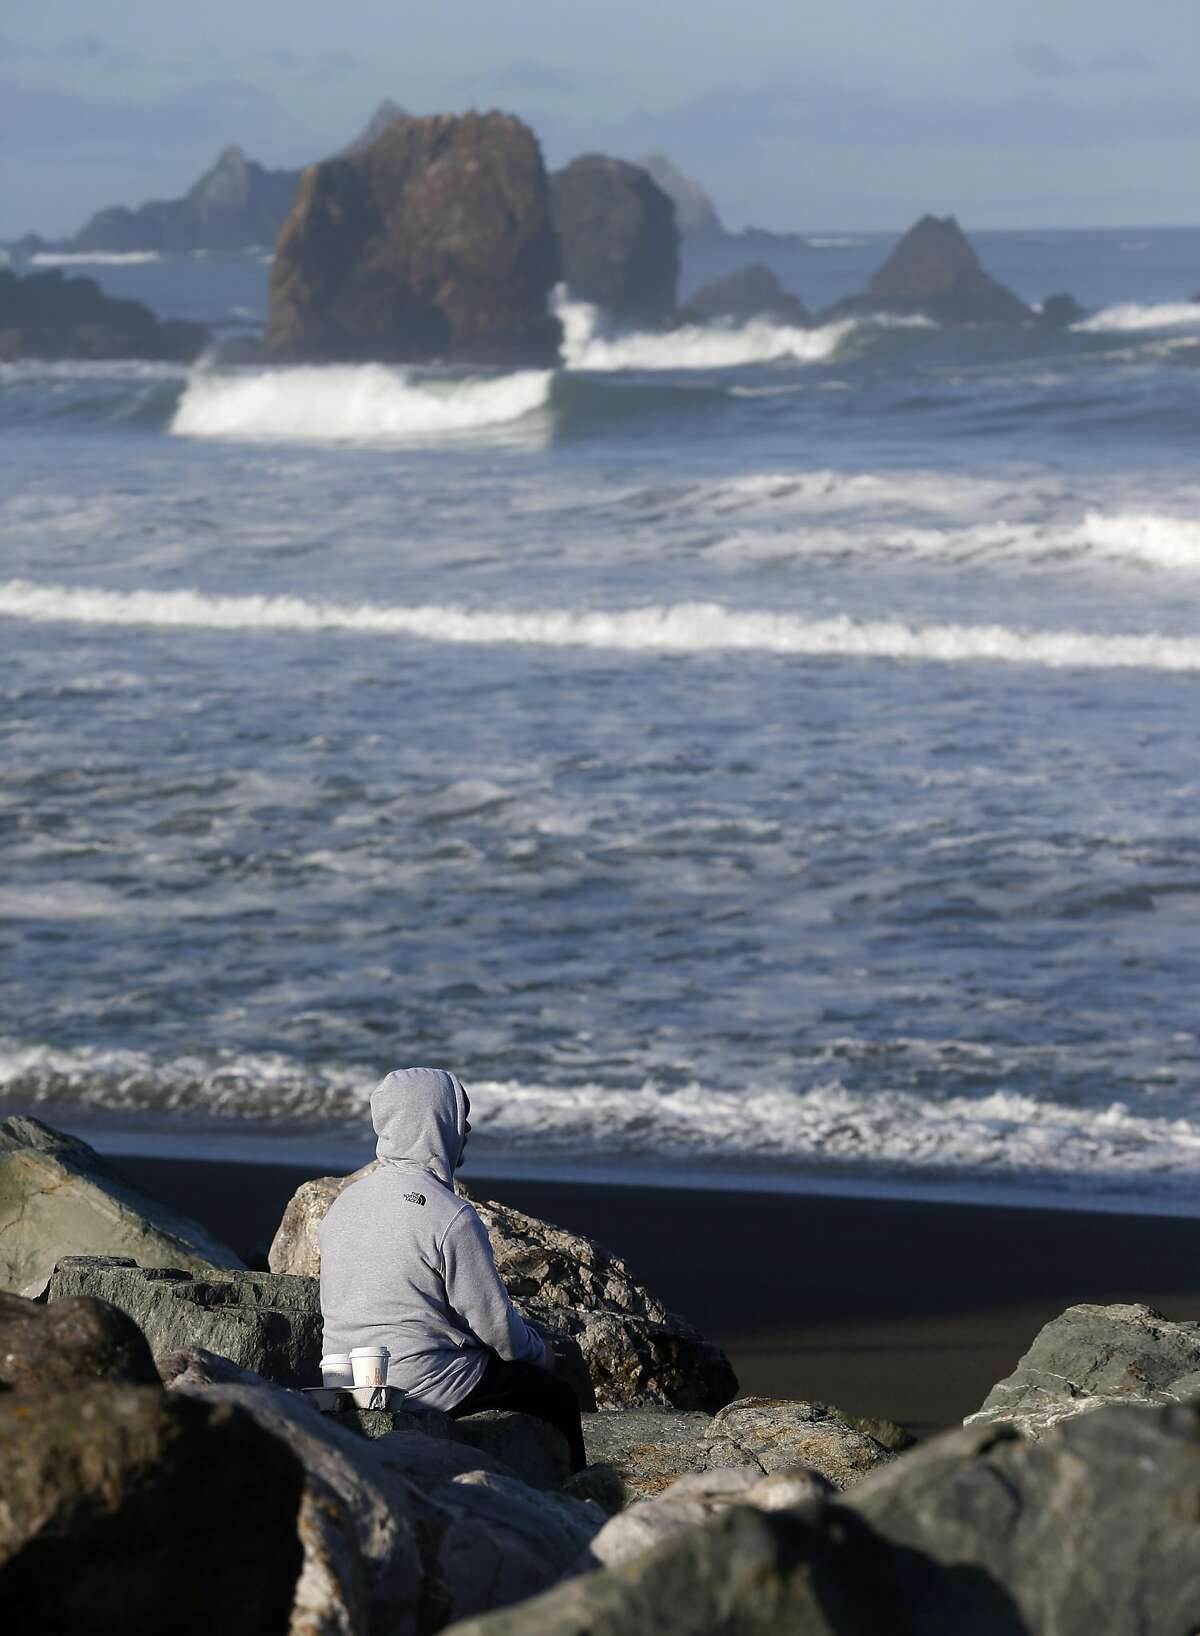 A man sits on the shore while the Coast Guard searches the ocean for a swimmer who was reported missing in the early morning hours off Rockaway Beach in Pacifica, Calif. on Tuesday, March 26, 2019.